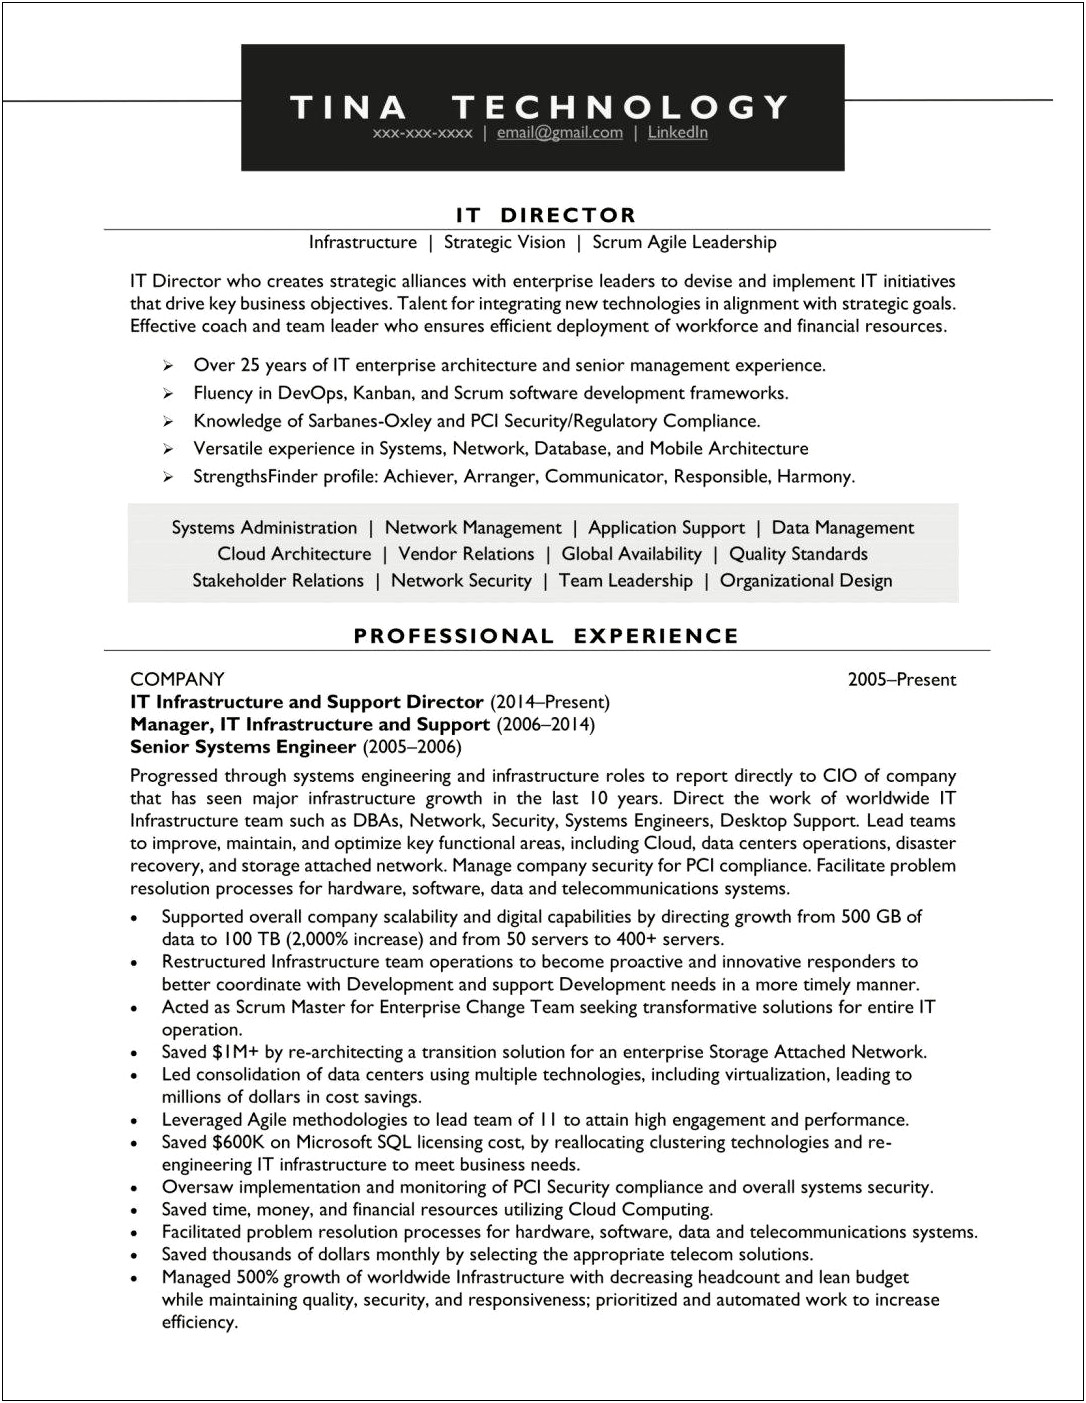 Resume Experience Sarbanes Oxley Compliance Sample